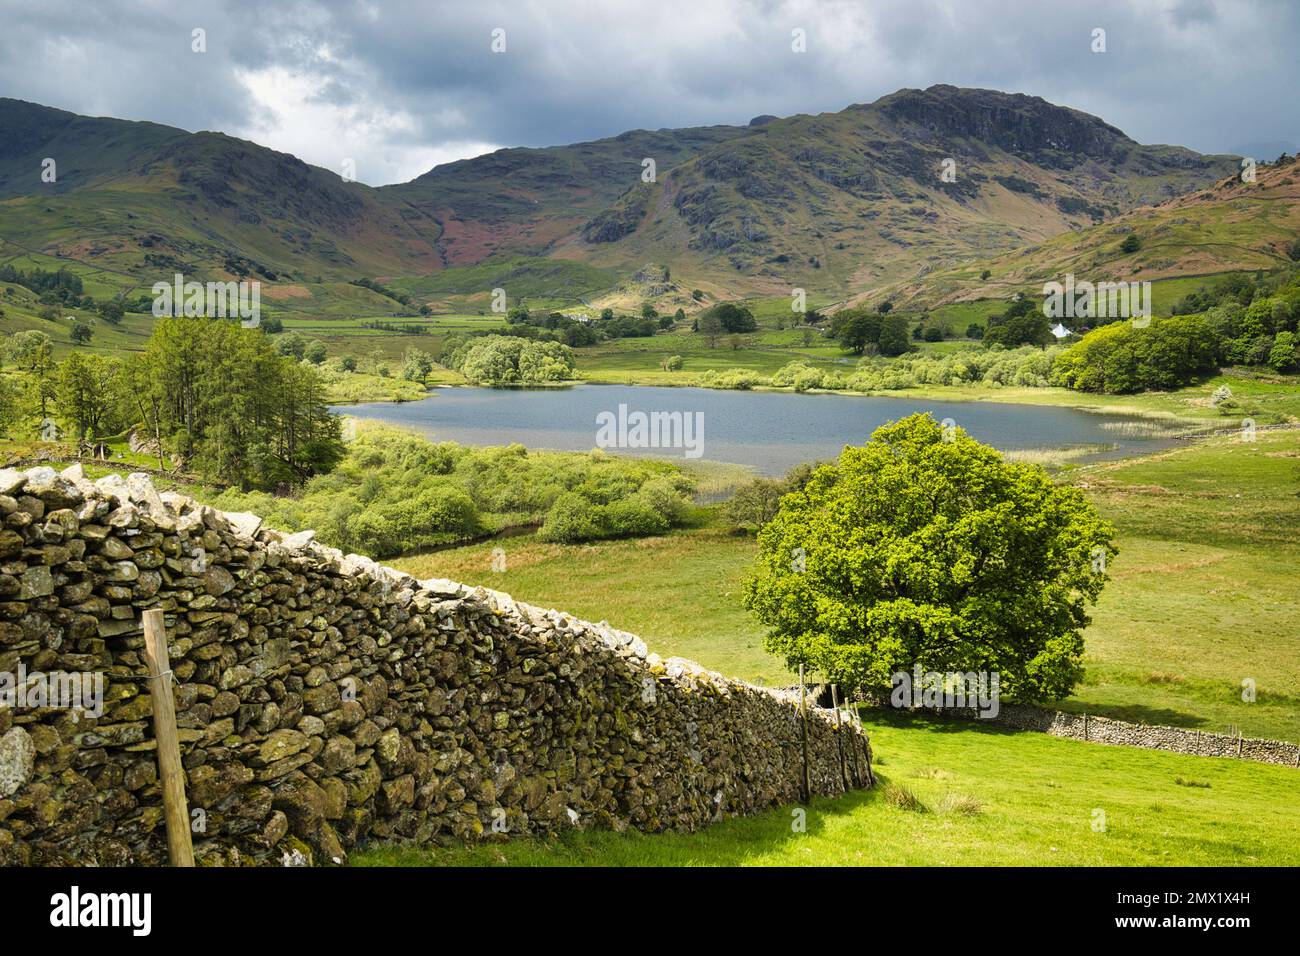 Langdale, Lake District, Cumbria, England, UK - Farmland, mountains, Little Langdale tarn, a stone built wall and woodlands in the valley Stock Photo